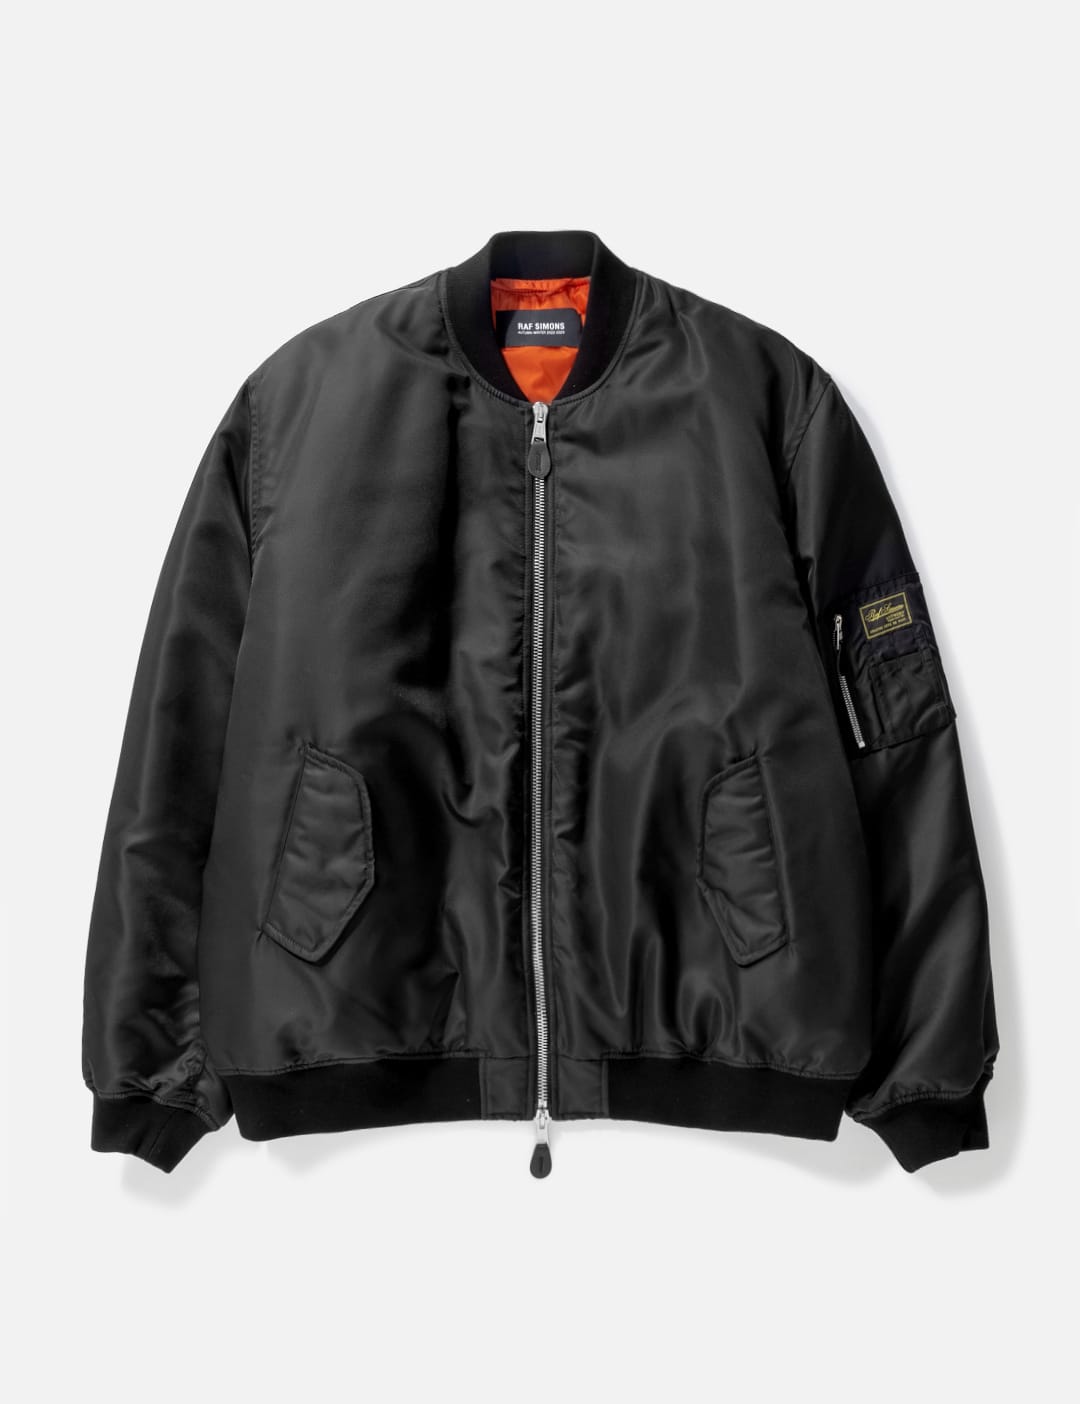 ACRONYM - J47R-GT 3L Gore-Tex® Pro Jacket | HBX - Globally Curated 